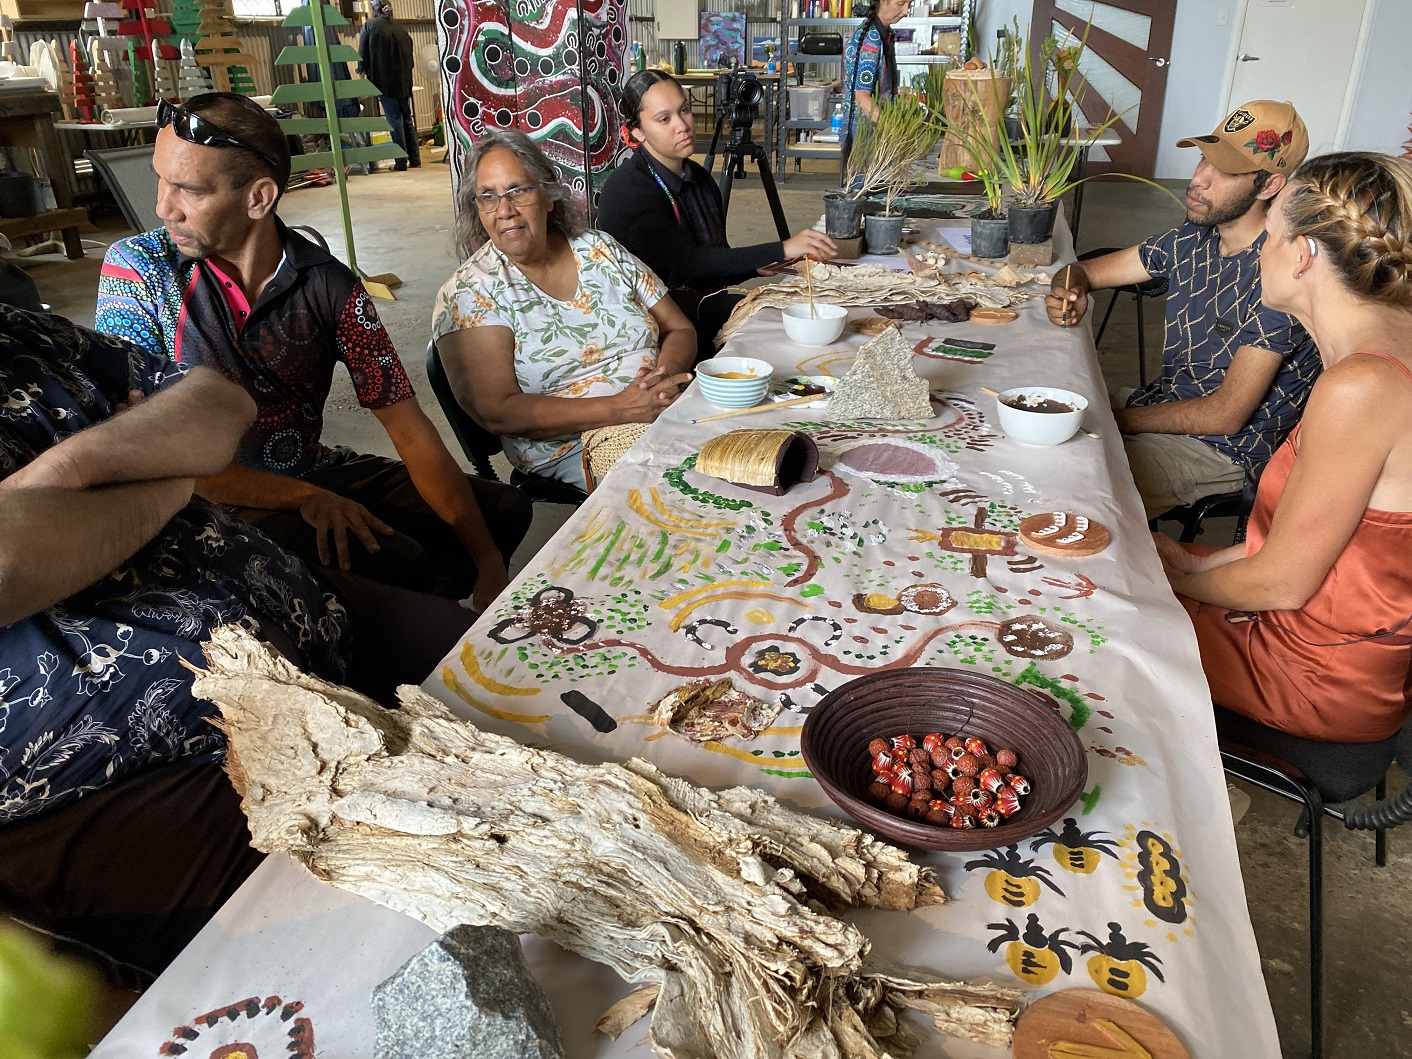 A group of Aboriginal people sit around a long table. Aboriginal artwork is painted on the paper tablecloth